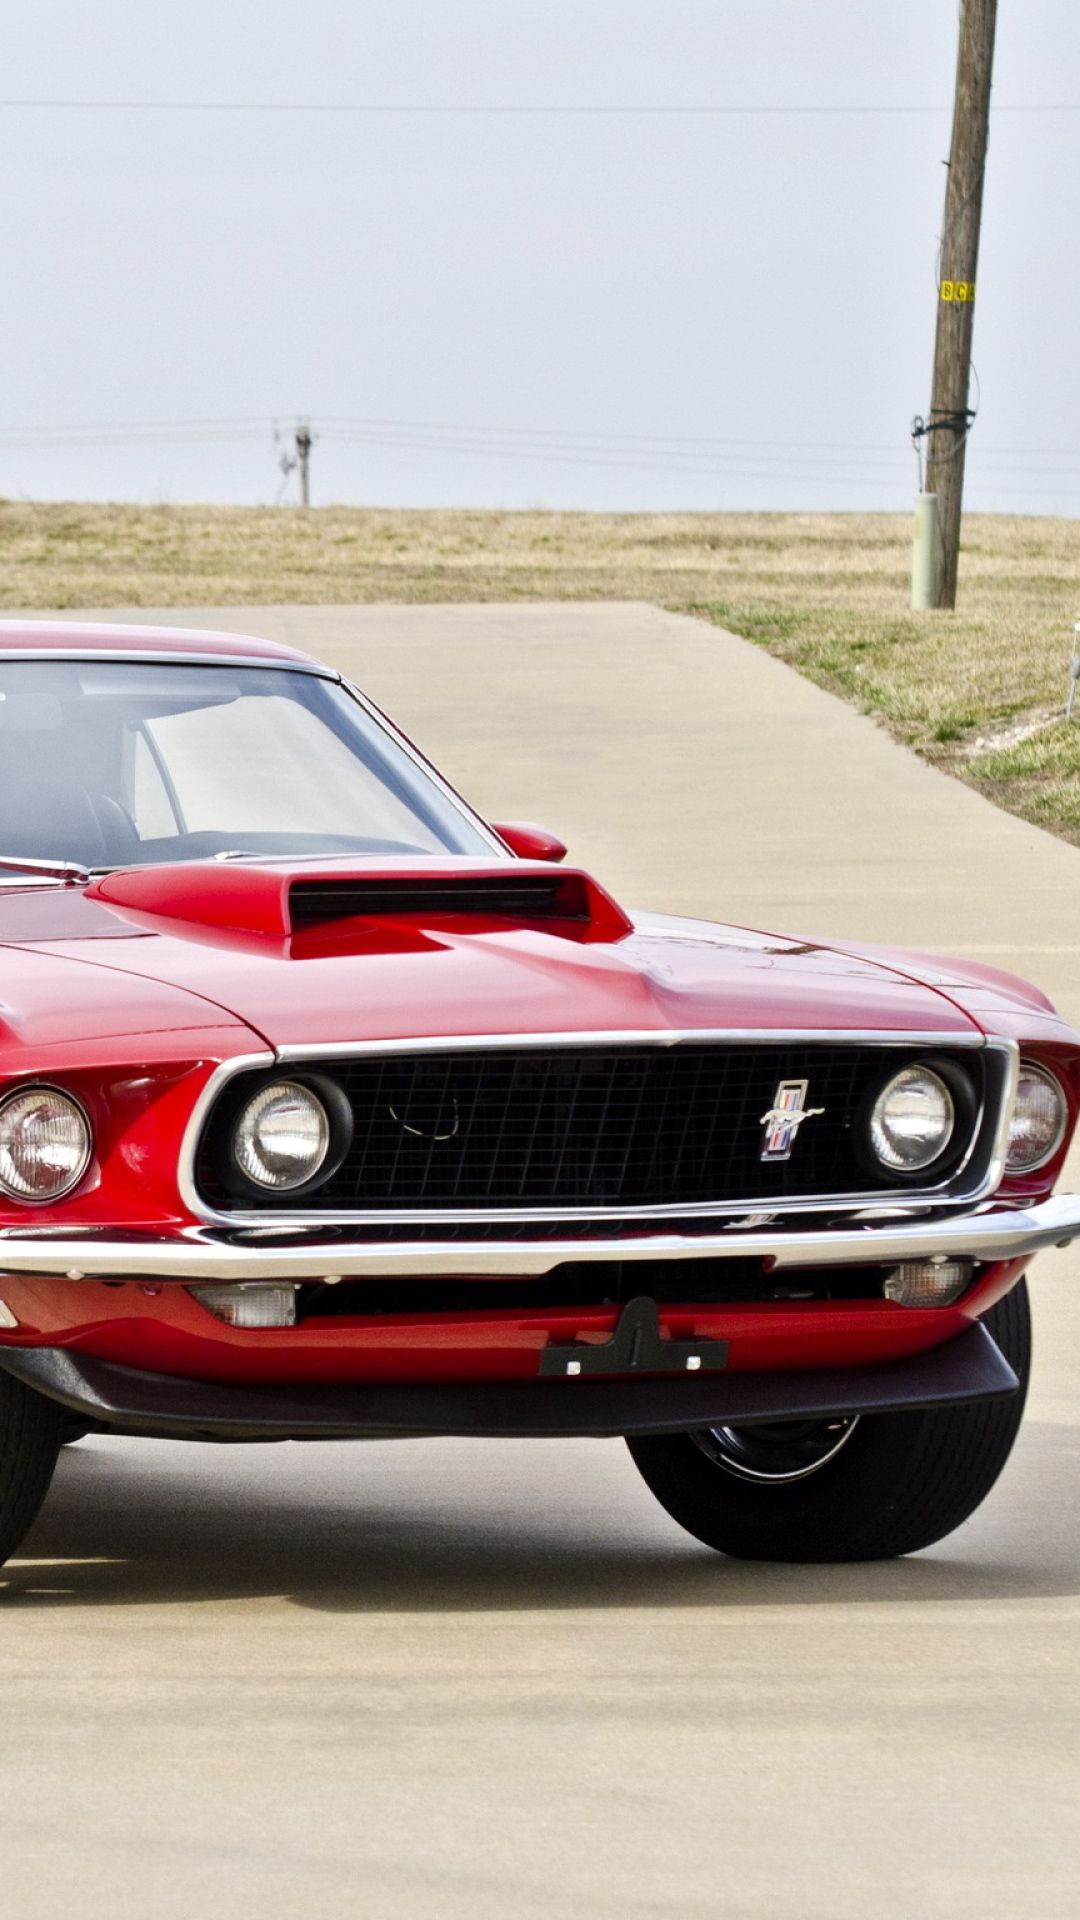 Download Wallpaper 1080x1920 Boss, Muscle car, Ford, 1969, Red